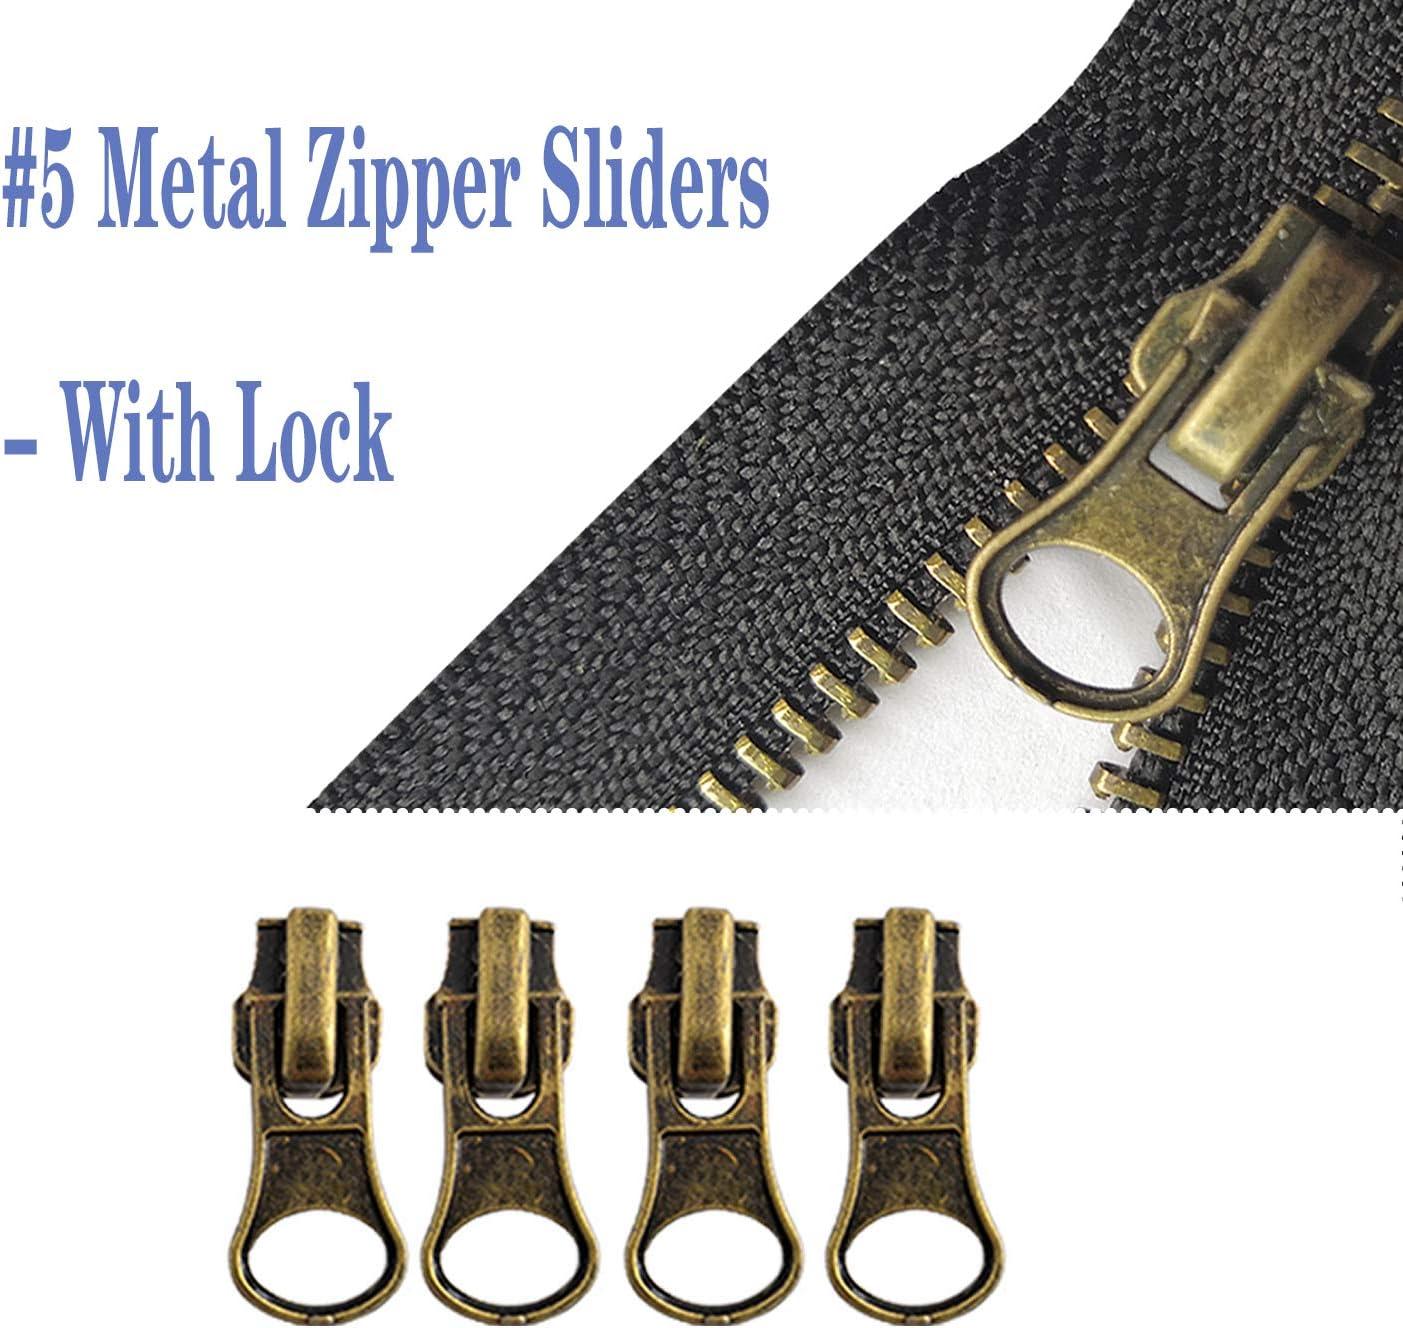 Meikeer 12 Pieces 5 Zipper Slider Repair Kits Black Bronze and Silver Zipper  Sliders Zipper Pull Replacement for Metal Plastic and Nylon Coil Jacket  Zippers